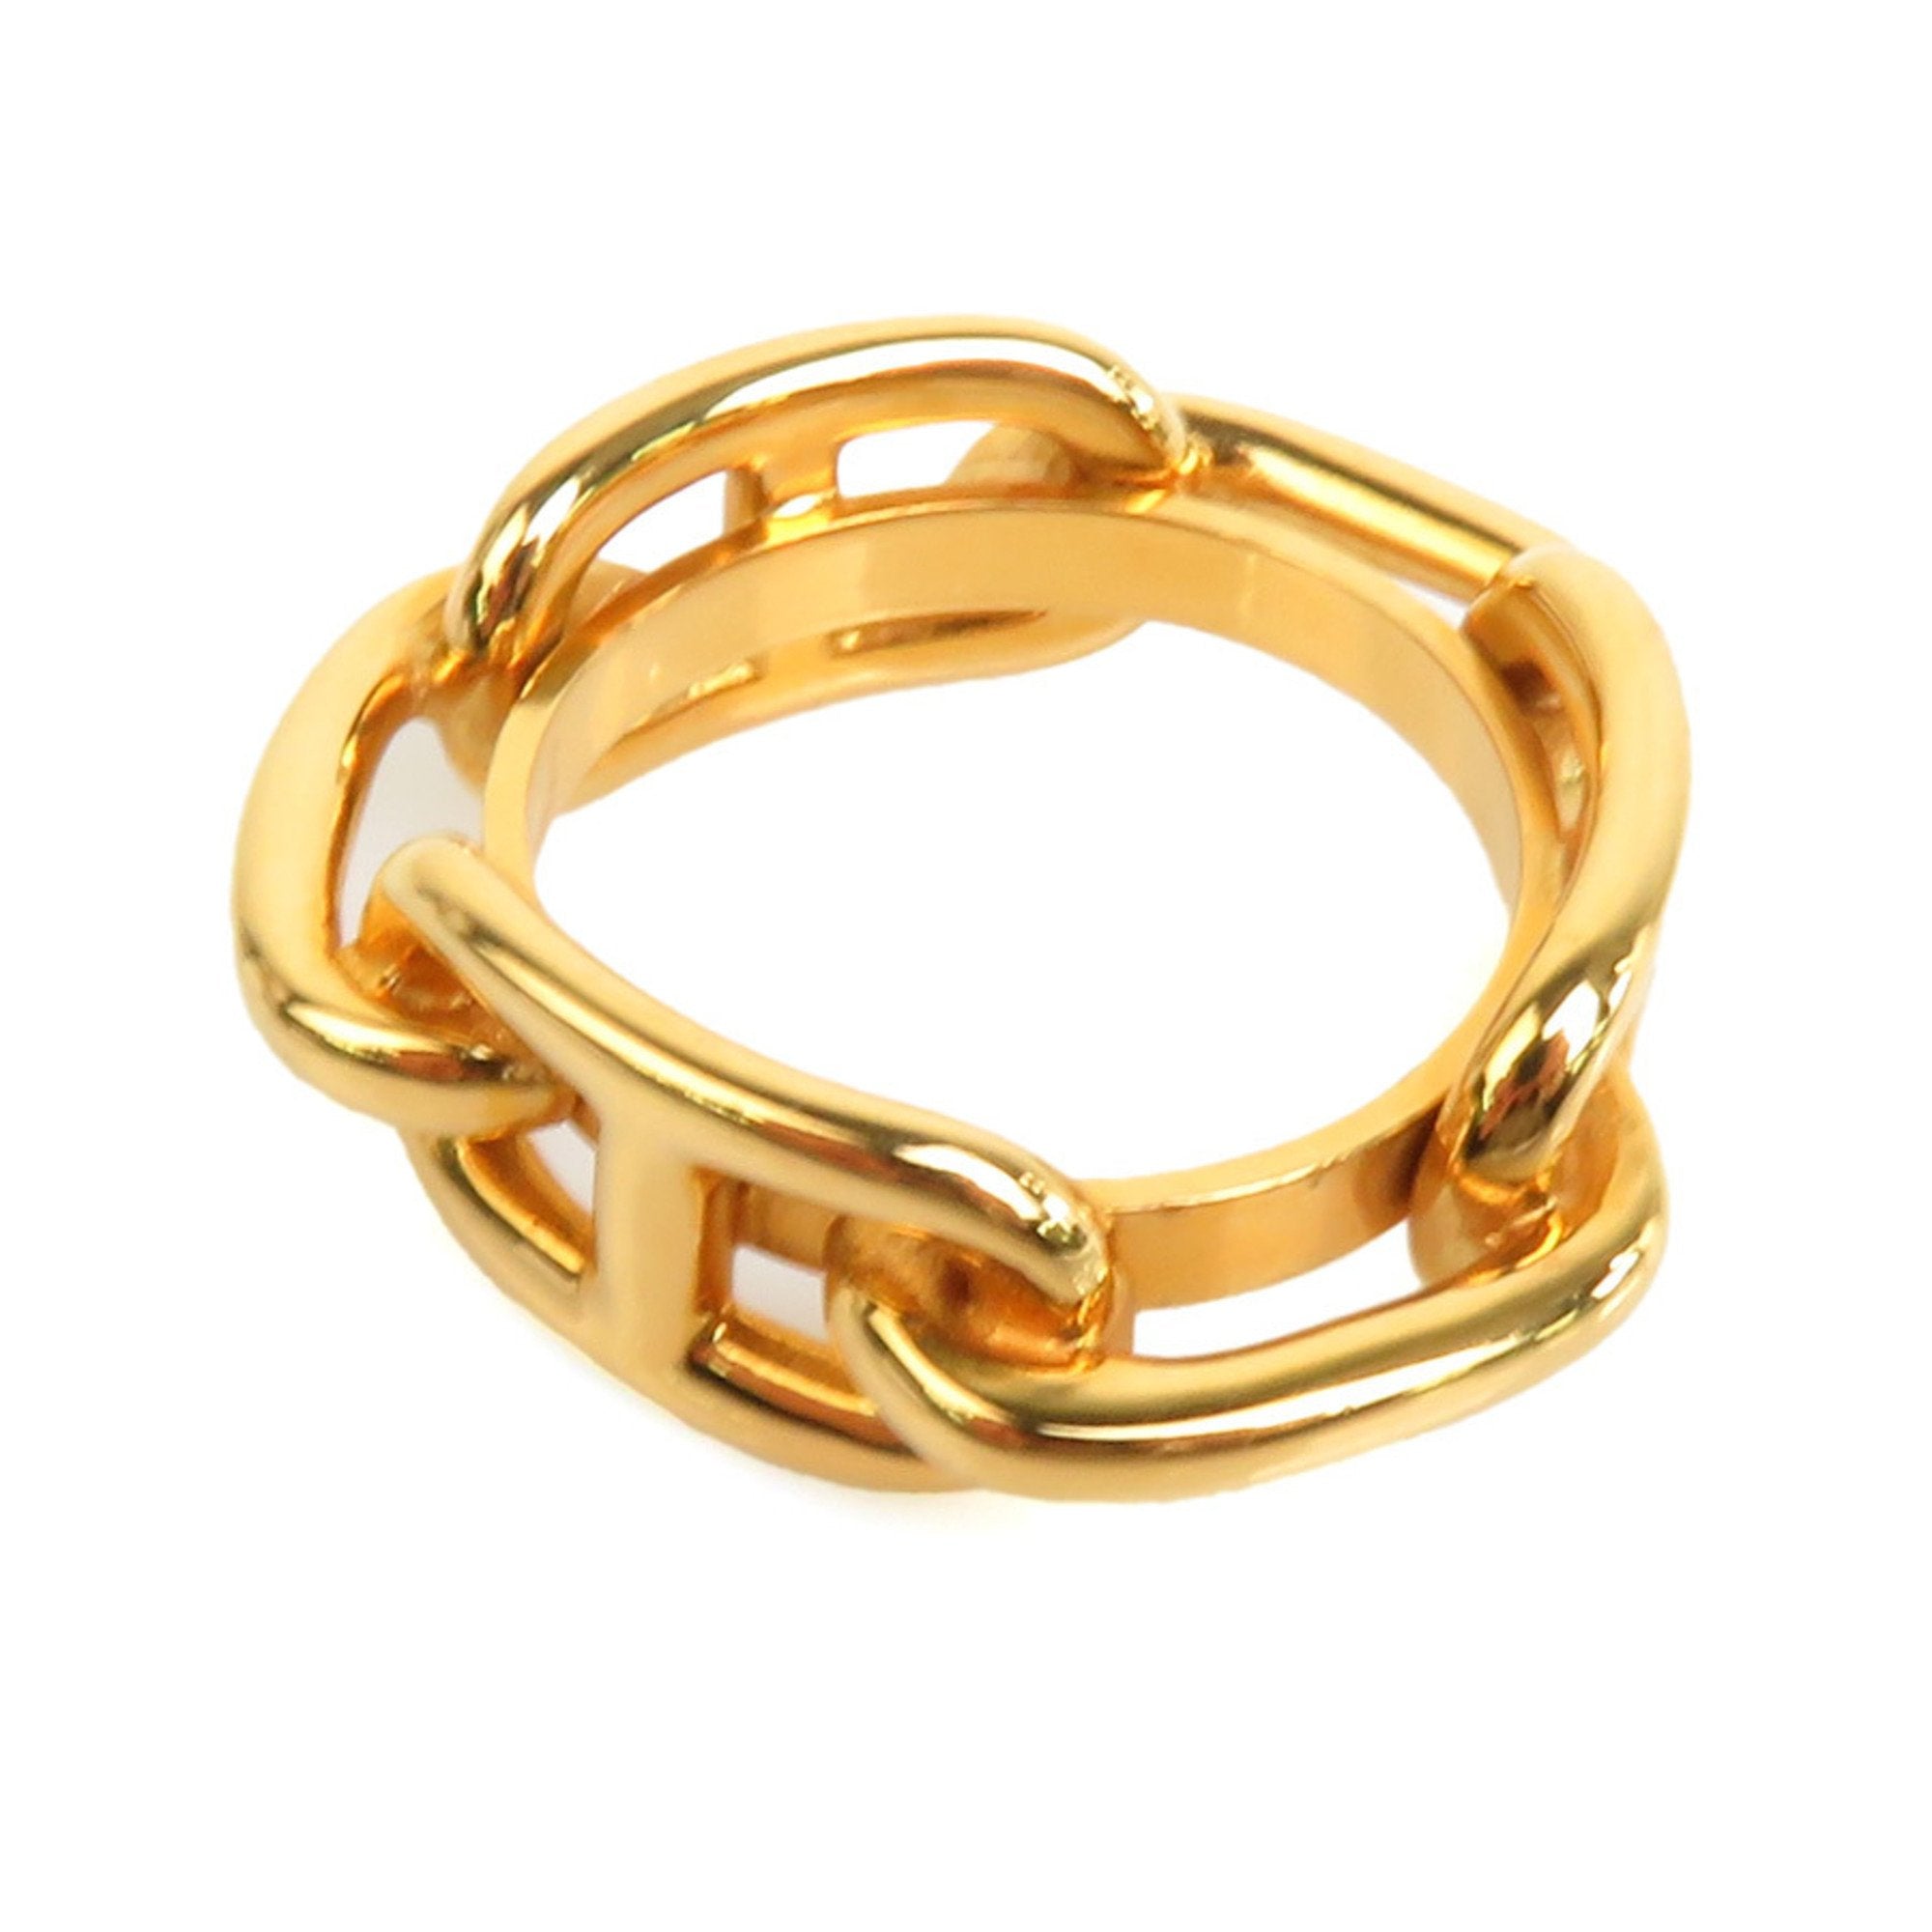 image of HERMES scarf muffler ring chaine d'uncre metal gold ladies